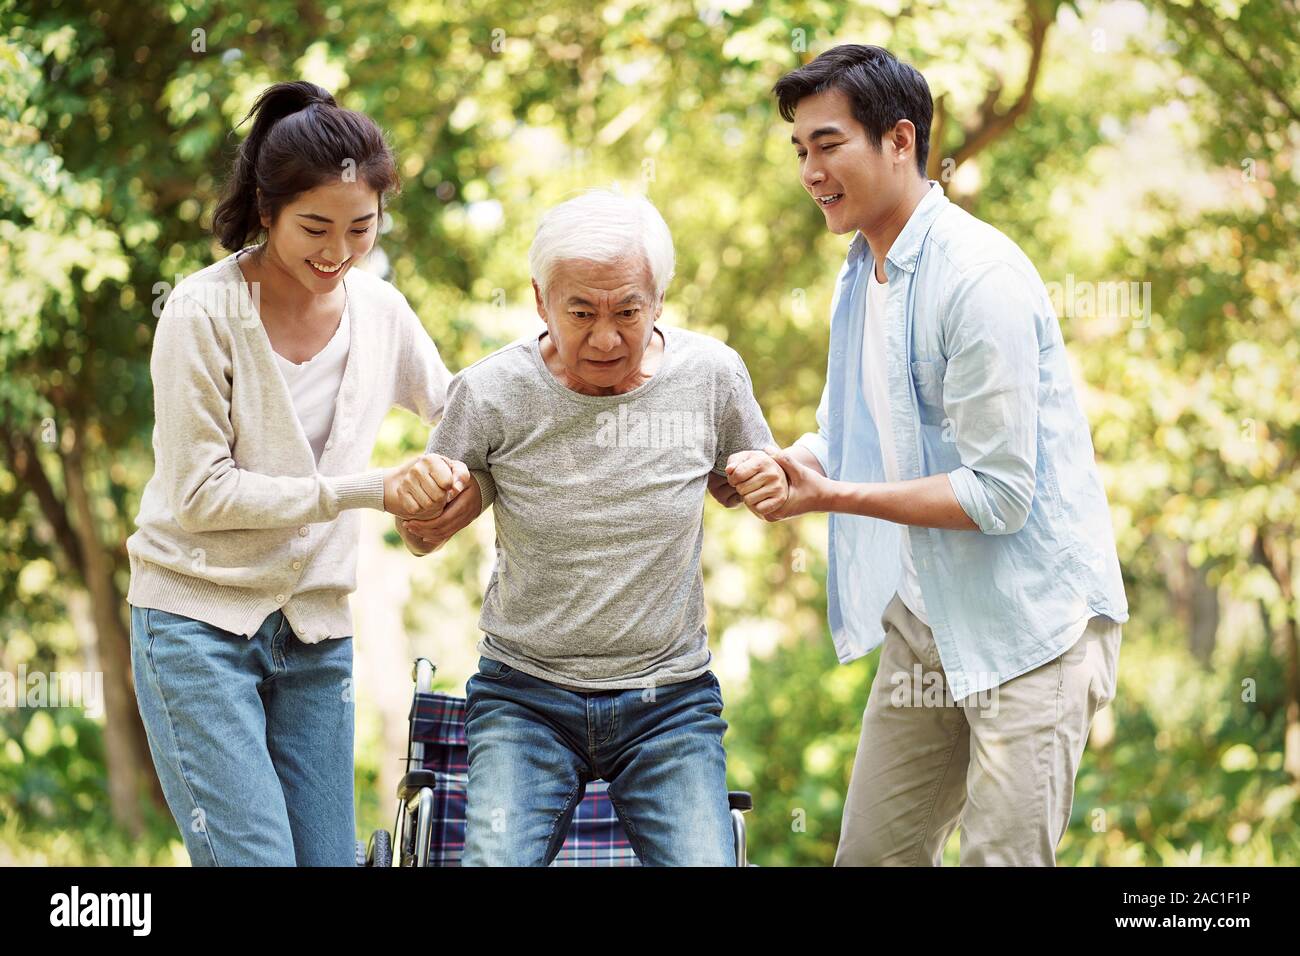 young asian man and woman helping wheelchair bound senior man stand up and walk Stock Photo